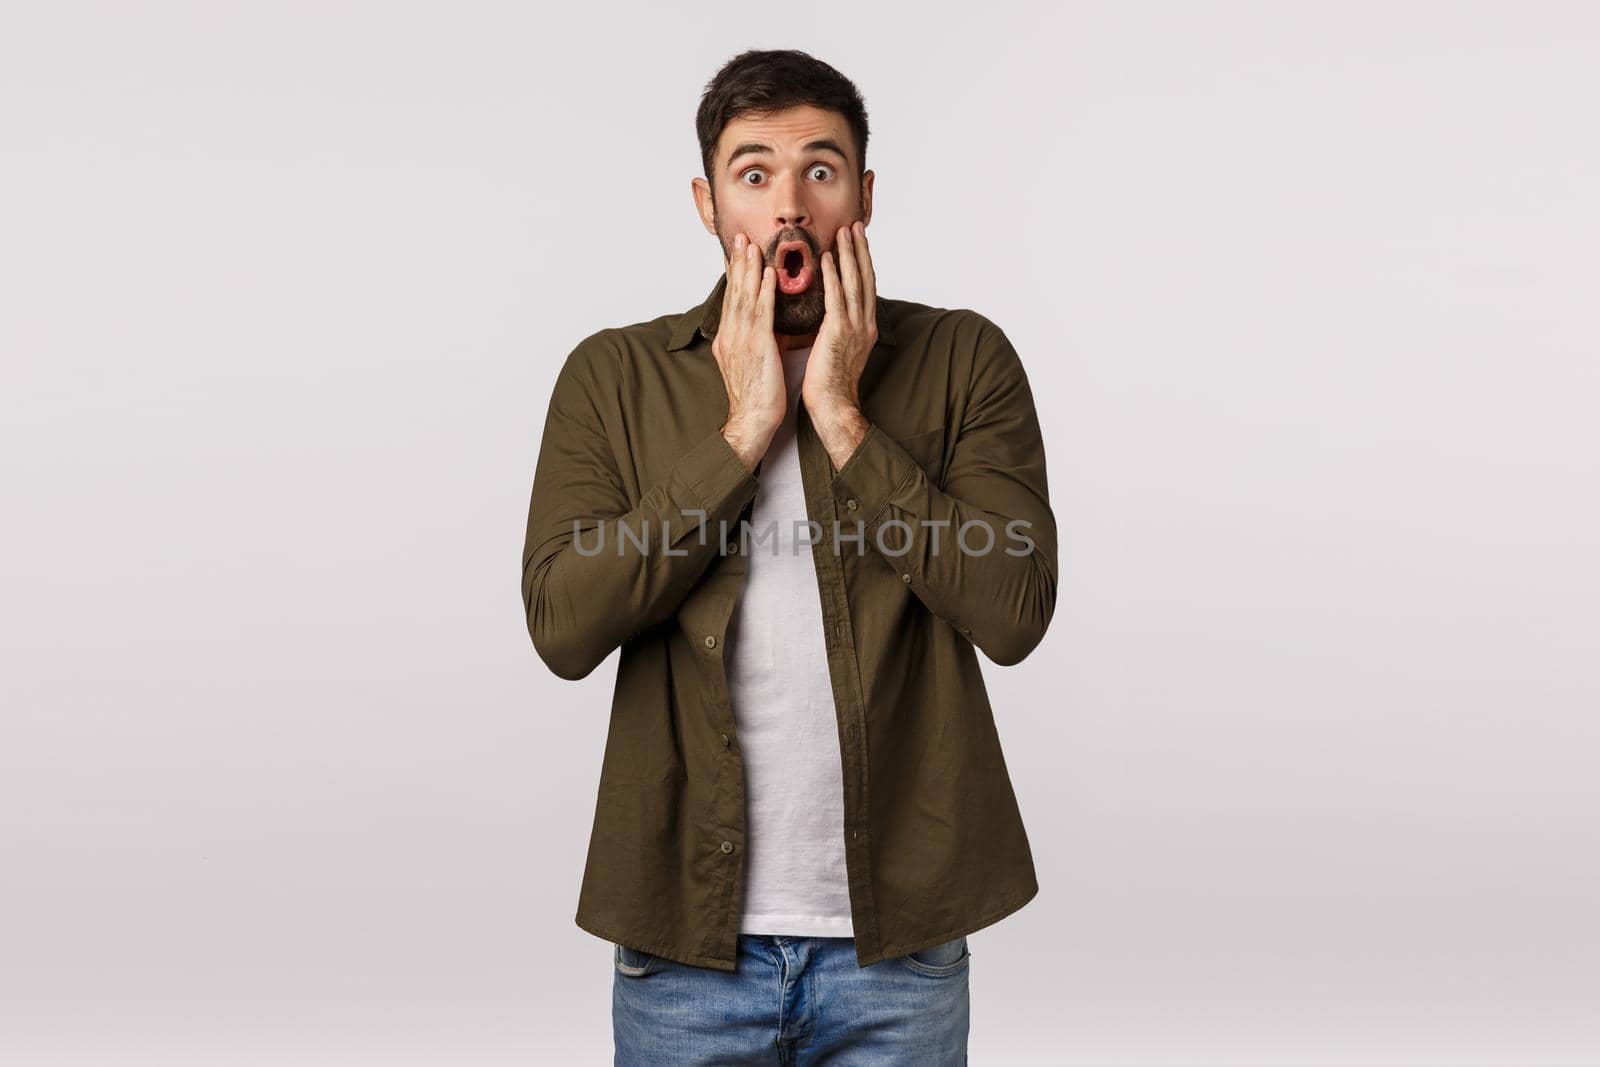 OMG check this out unbelievable. Astonished and speechless good-looking modern male in coat, lose breath, gasping amazed, say wow stare camera impressed, touch cheeks fascinated, white background.